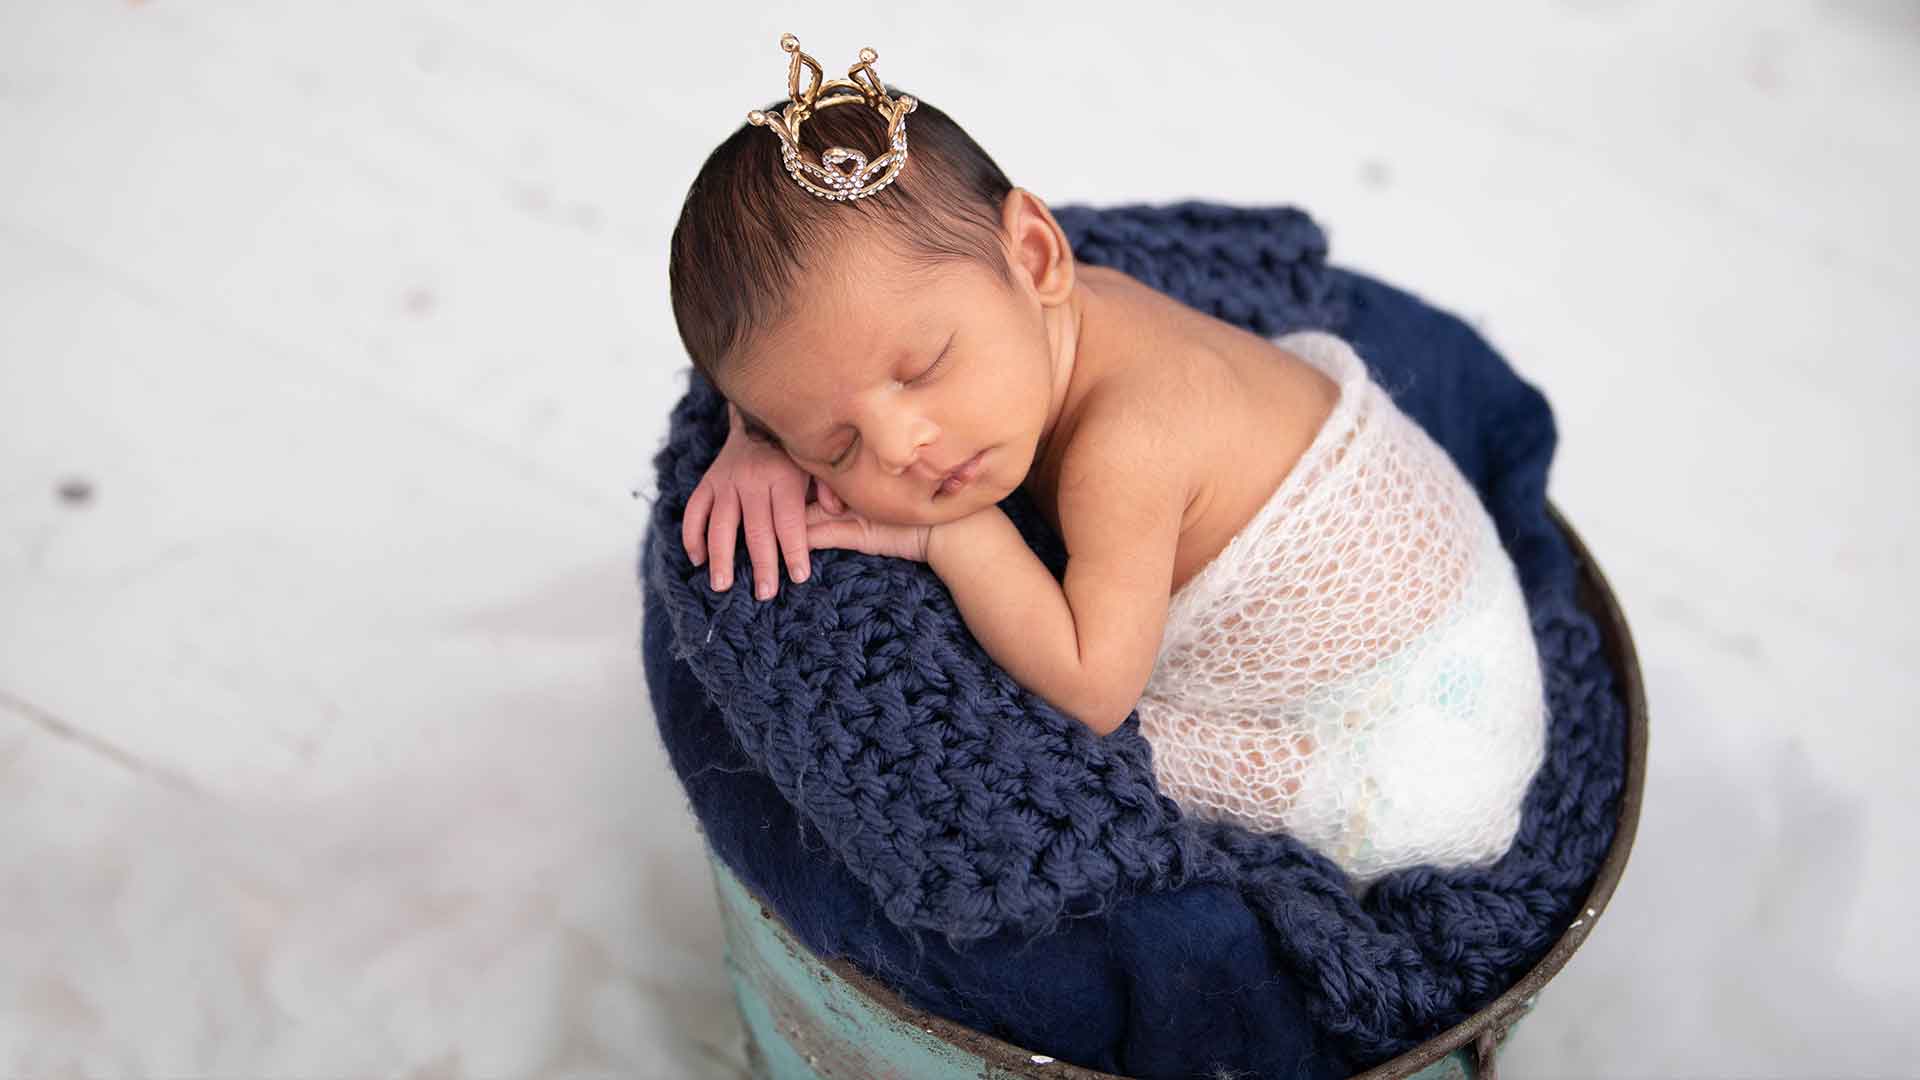 3 Month Old Poses | Little Leapling Photography - littleleapling.com